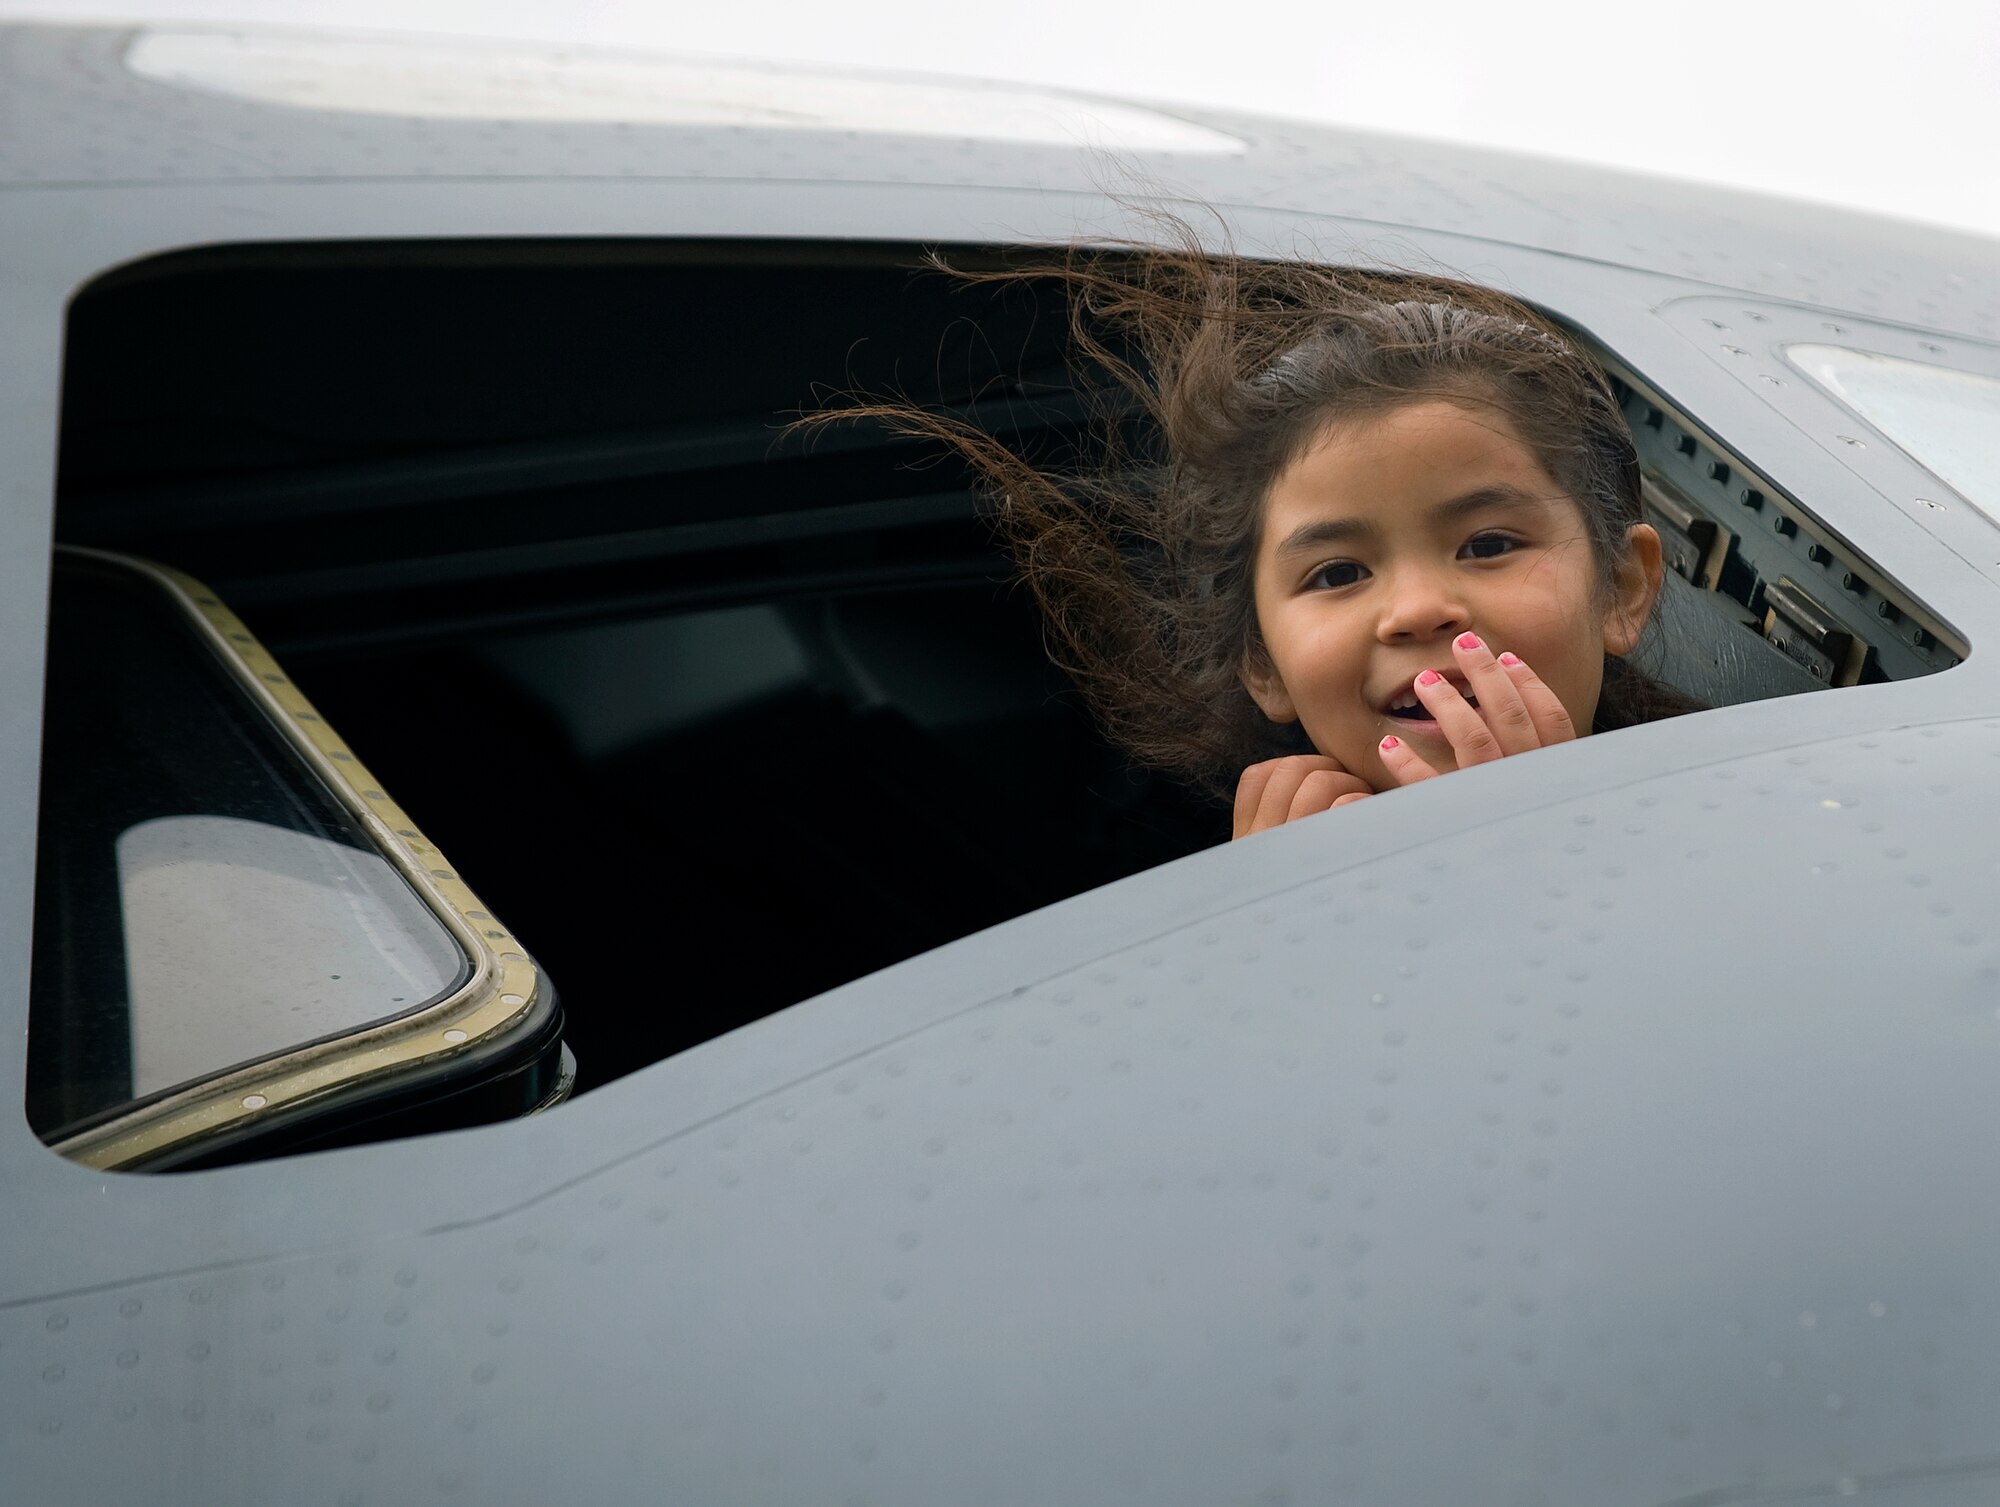 Itzel Rodriguez, 6 years old, peers out from the cockpit window of a C-17 Globemaster III Sept. 12, 2009, during the California Capital Air Show, the culminating event of Air Force Week Sacramento.  Air Force Week-Sacramento is an event featuring various activities and exhibitions to educate the community about the Air Force's capabilities and missions.  (U.S. Air Force photo/Staff Sgt. Bennie J. Davis III)